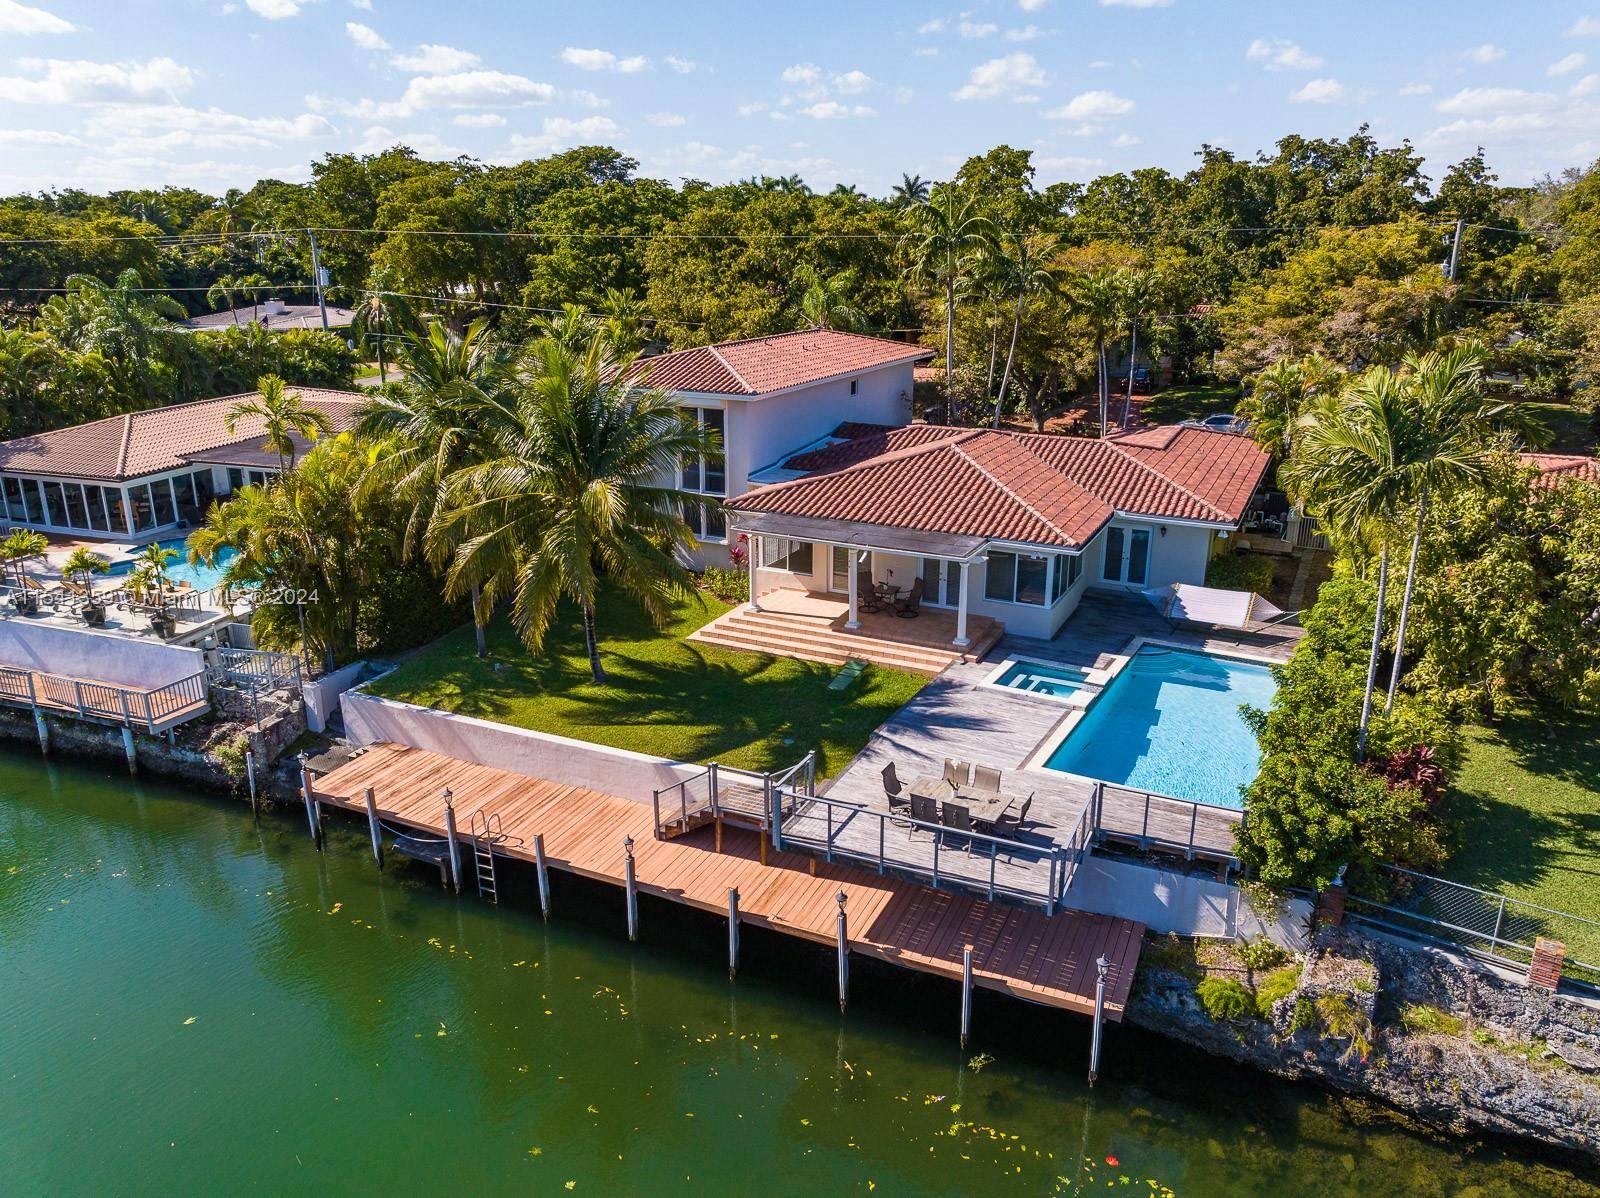 Welcome to 616 Jeronimo, a truly graceful waterfront residence nestled on a quiet Coral Gables street.